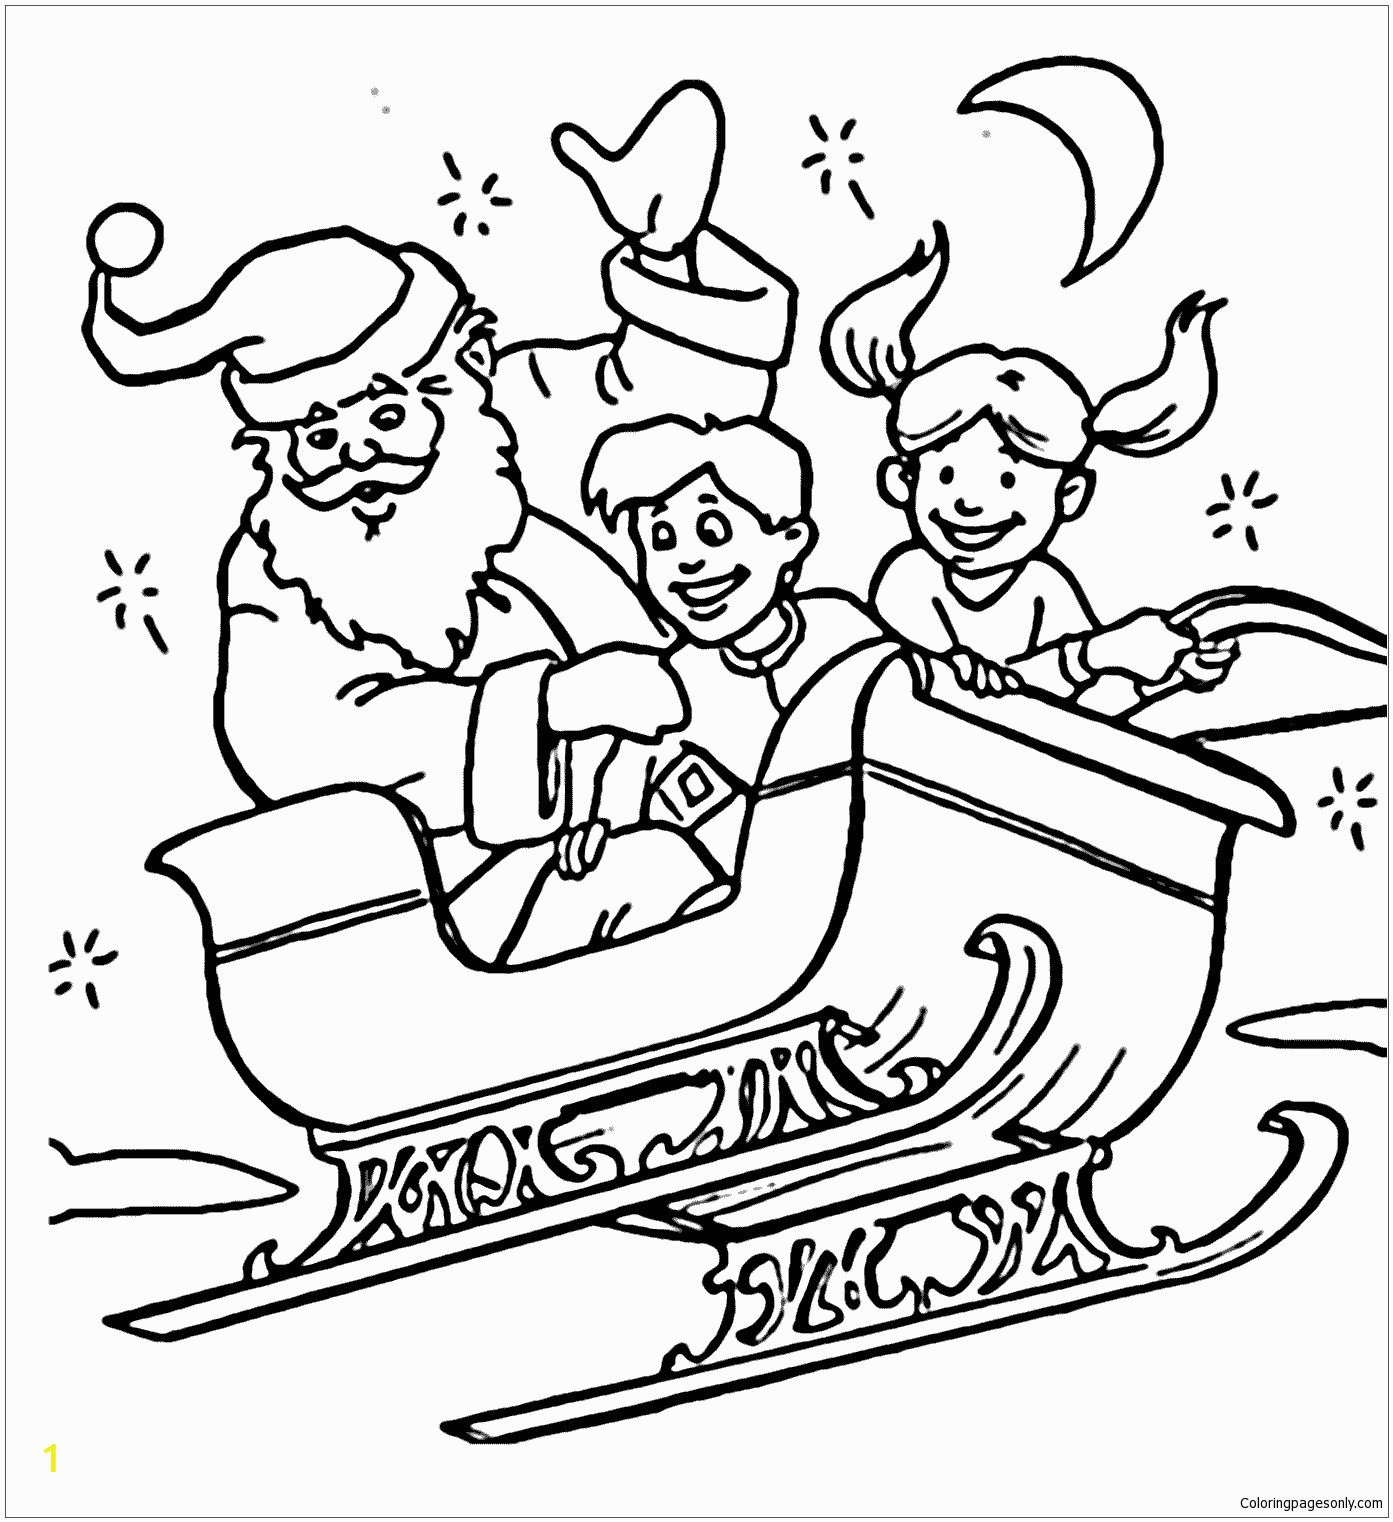 Santa and Sleigh Coloring Pages Printable Santa Claus and Children Flying In Sleigh Coloring Pages